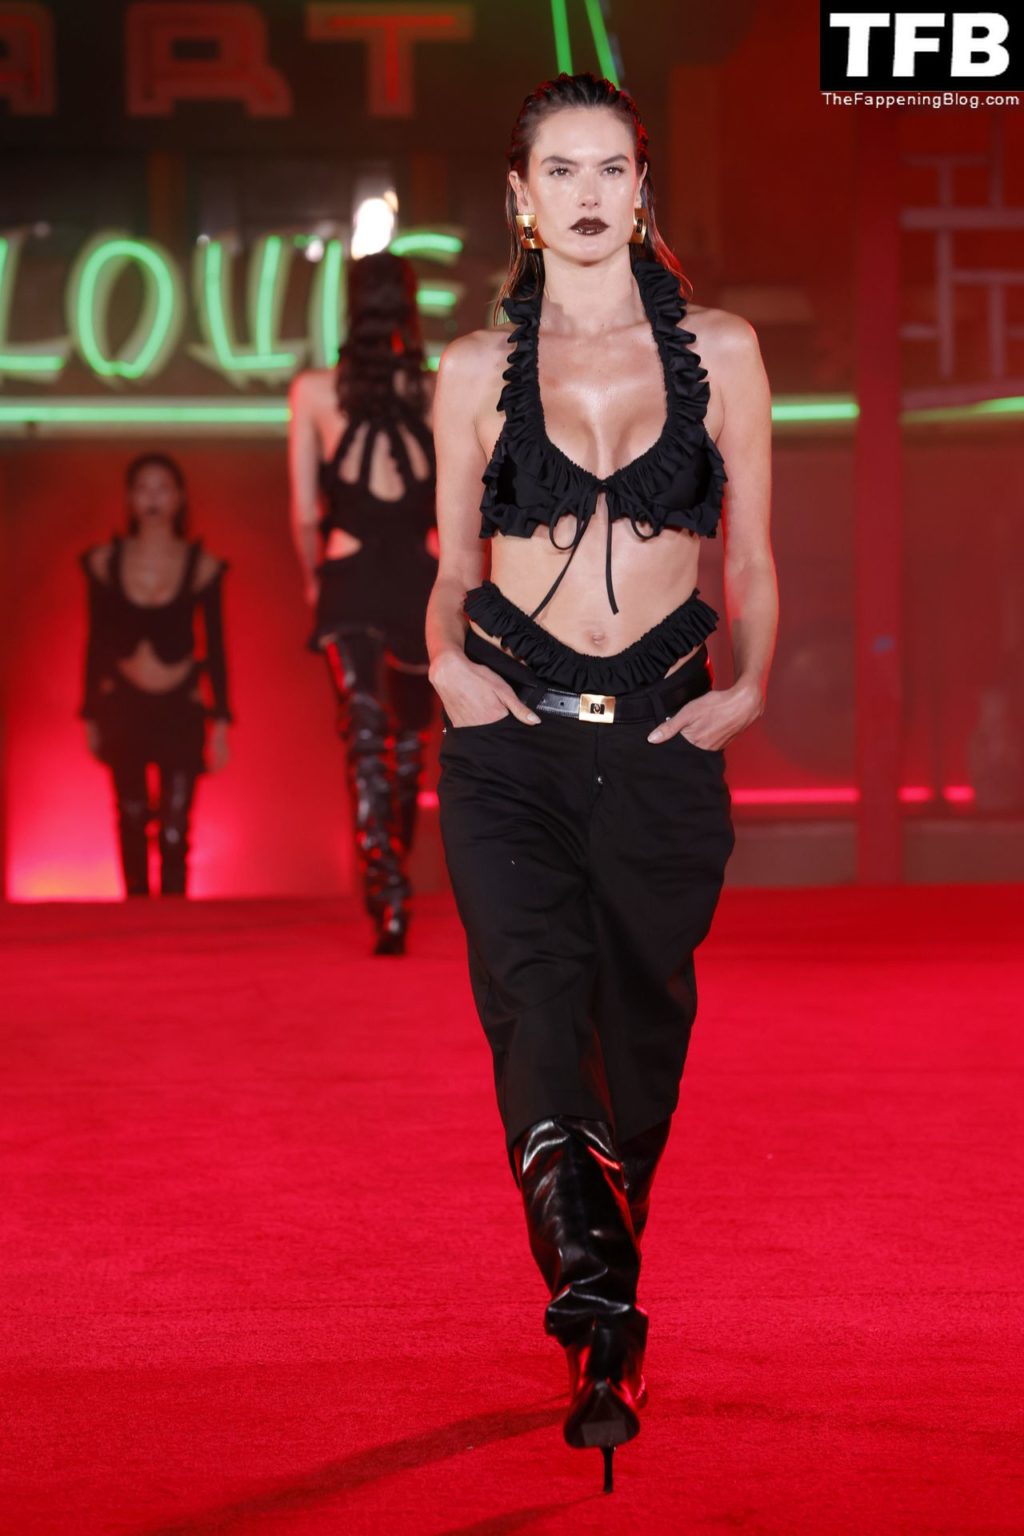 Alessandra Ambrosio Flaunts Her Sexy Tits During the “Fortune City” Runway Show (3 Photos + Video)